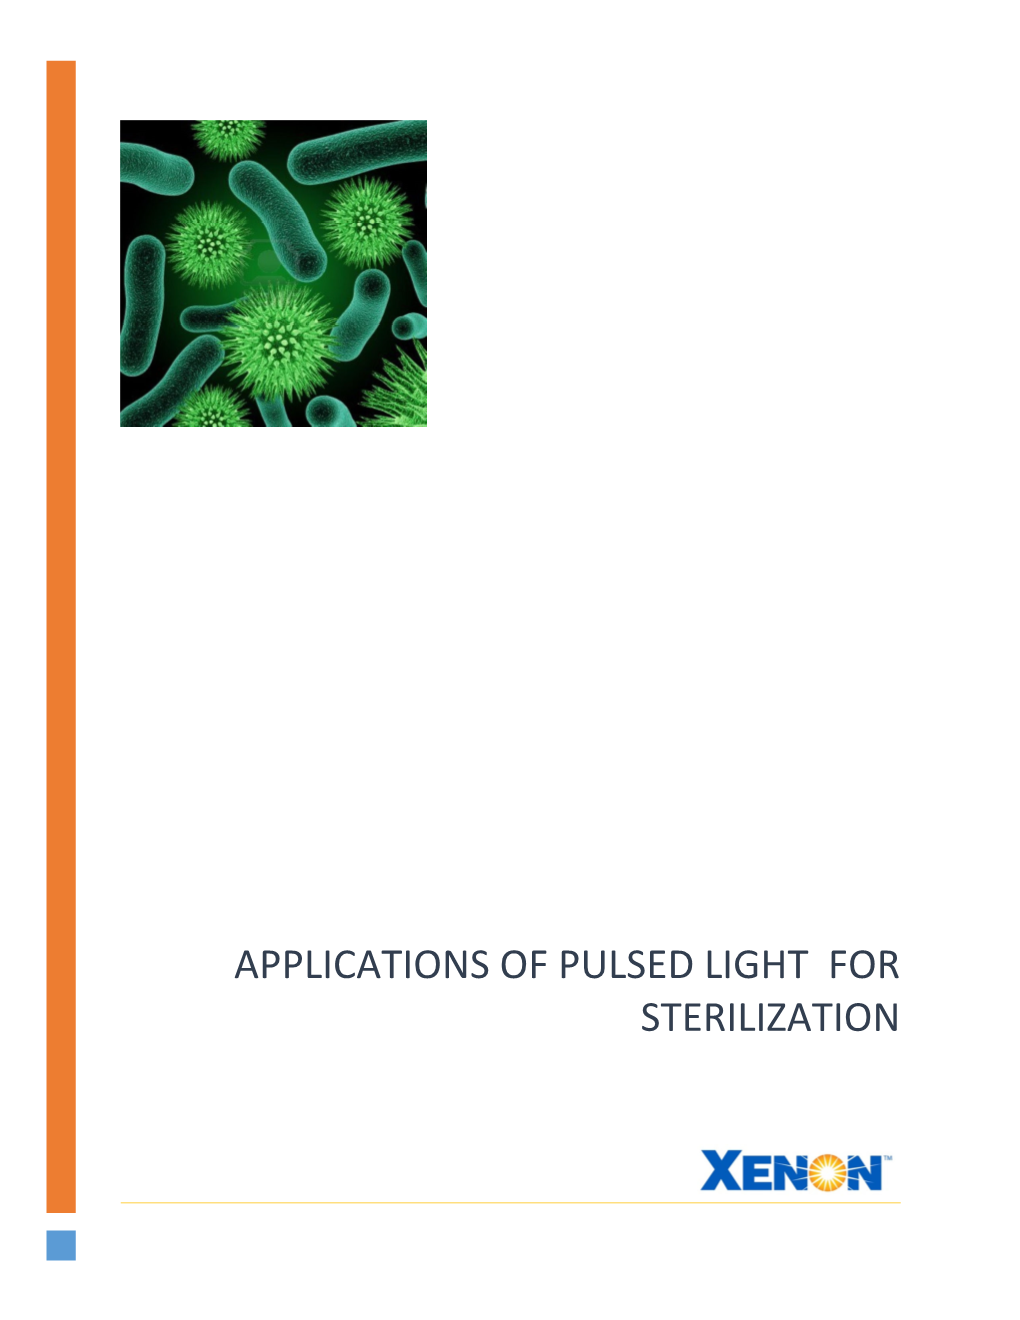 Applications of Pulsed Light for Sterilization